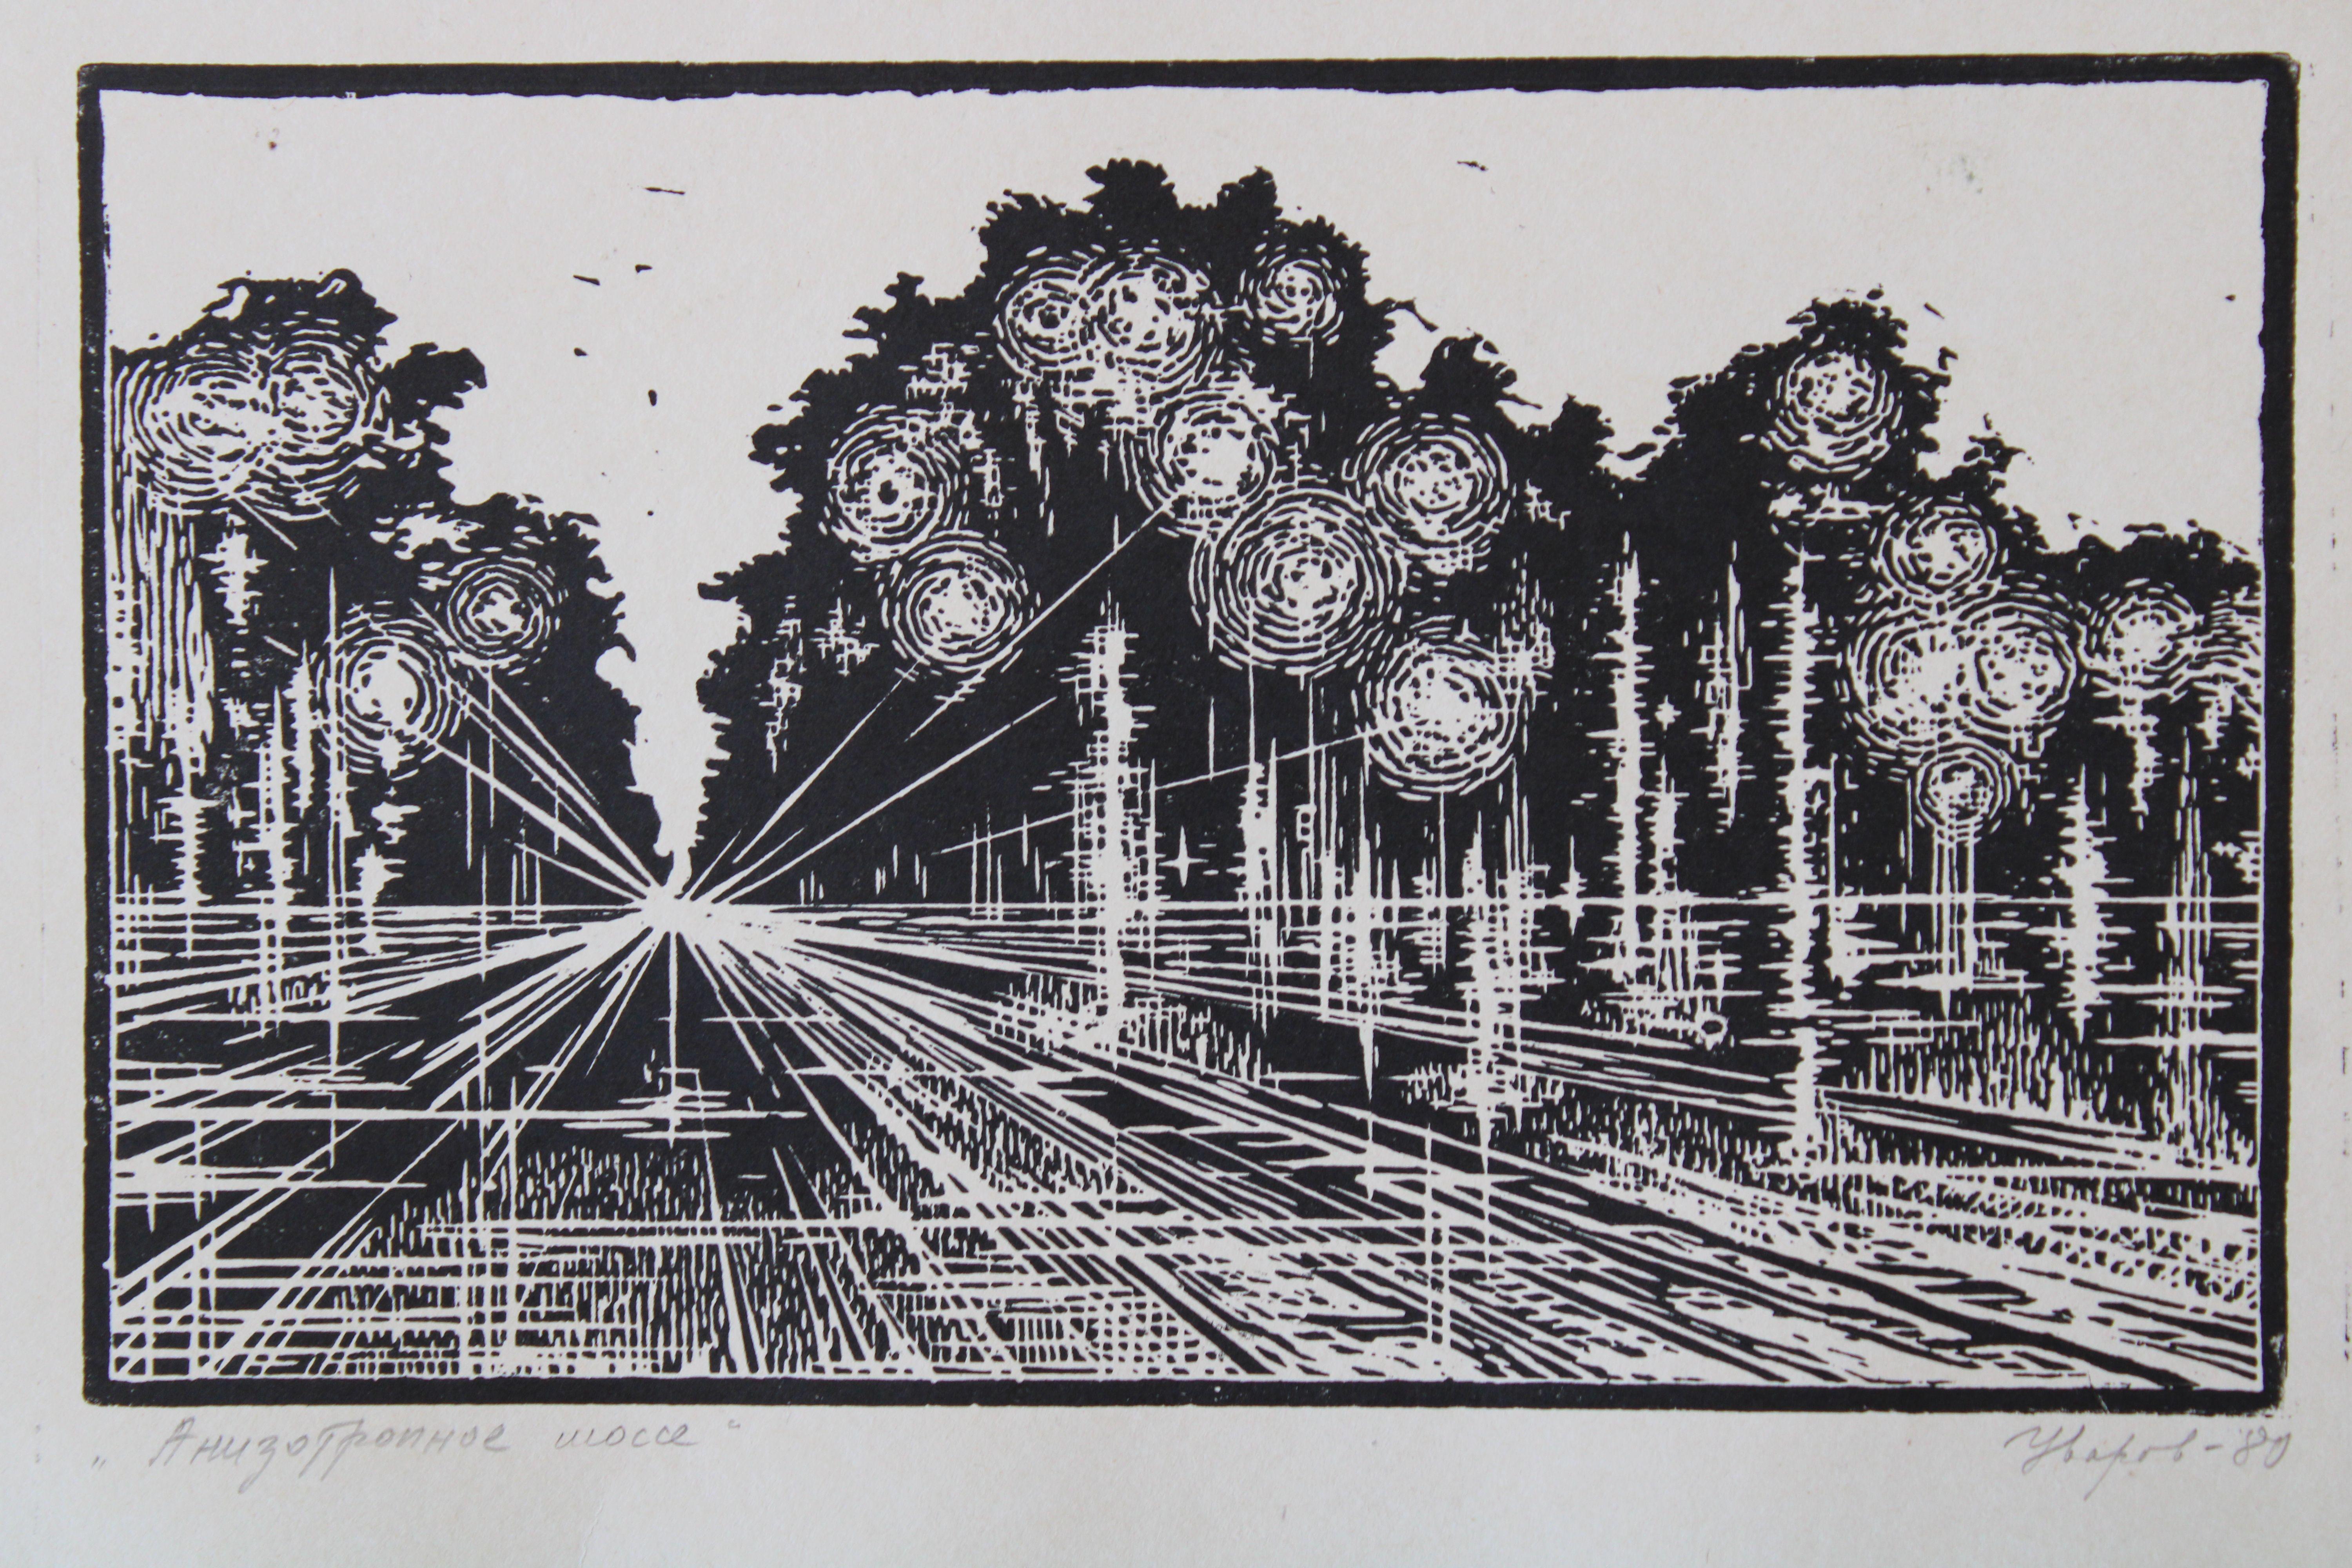 Anozotropic highway

1980s, paper, linocut, 15.5x25 cm

The artwork depicts a highway or road that takes on a surreal and abstract form. The term 